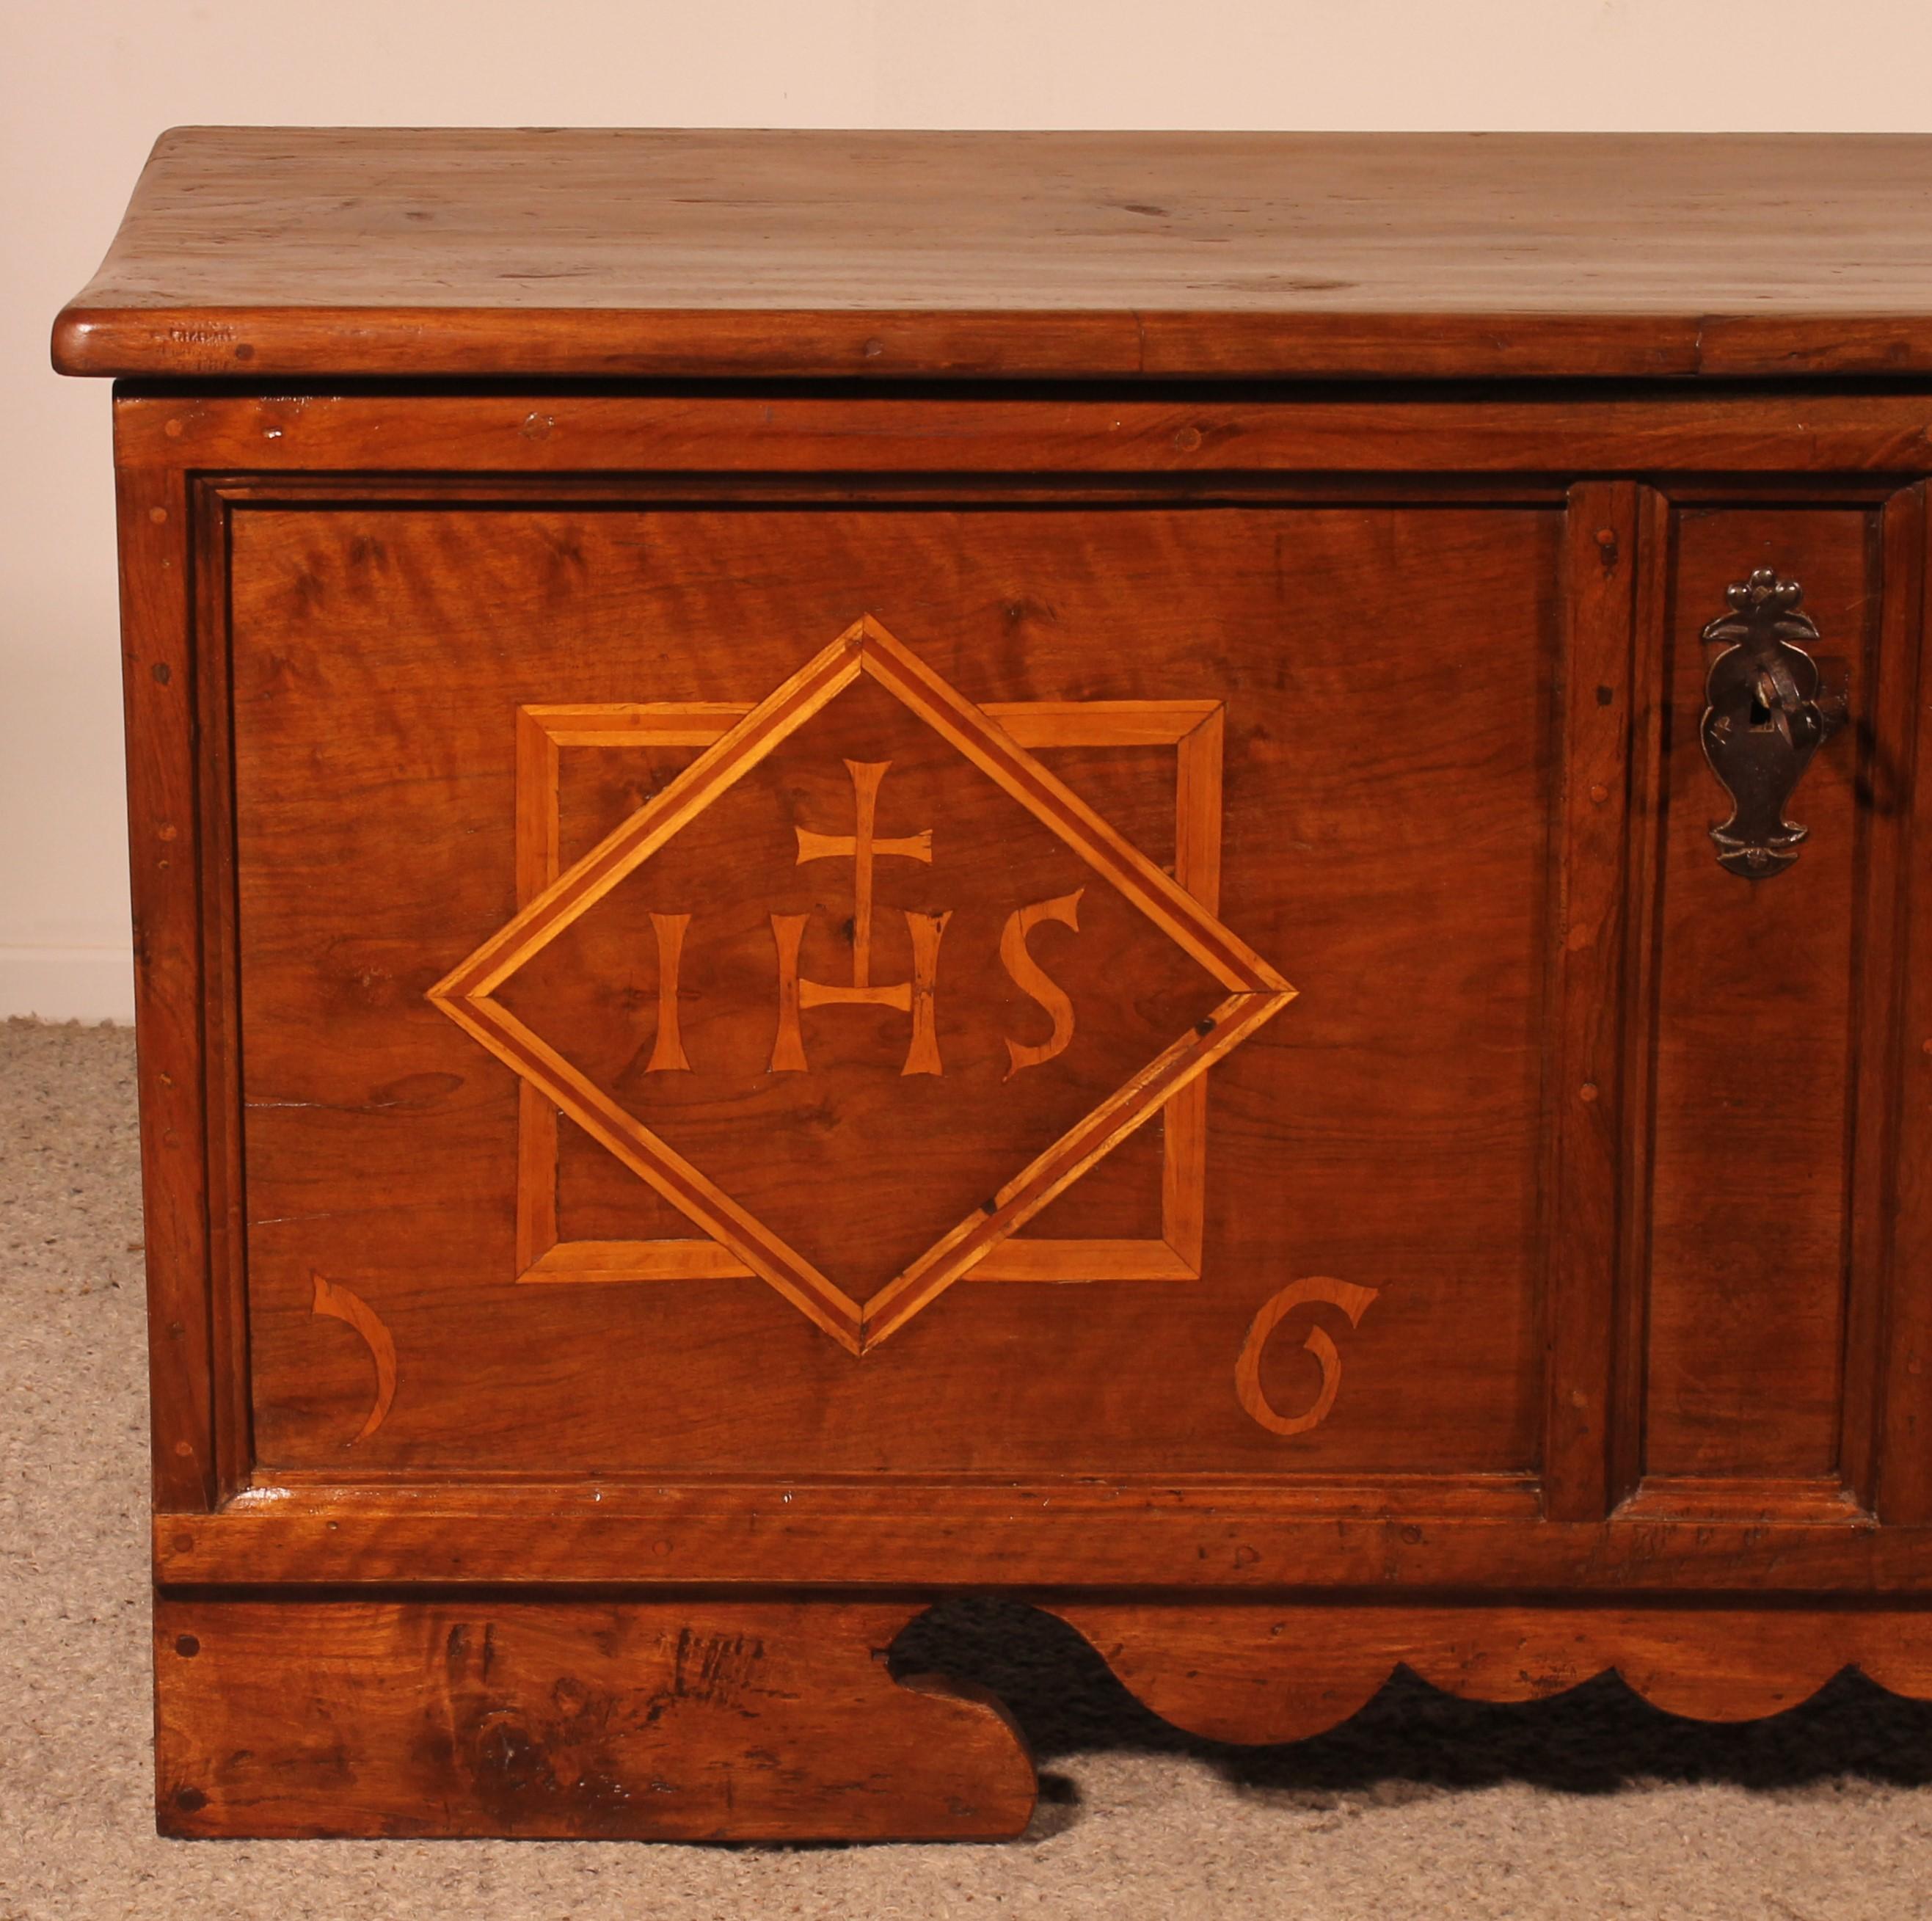 Superb walnut chest from the Renaissance period dated 1624 from the Haute Savoie region
Very beautiful blond walnut chest which has its original lock and key
We can find the IHS monogram “Iesus Hominum Salvator” This is the emblem shown on the coat